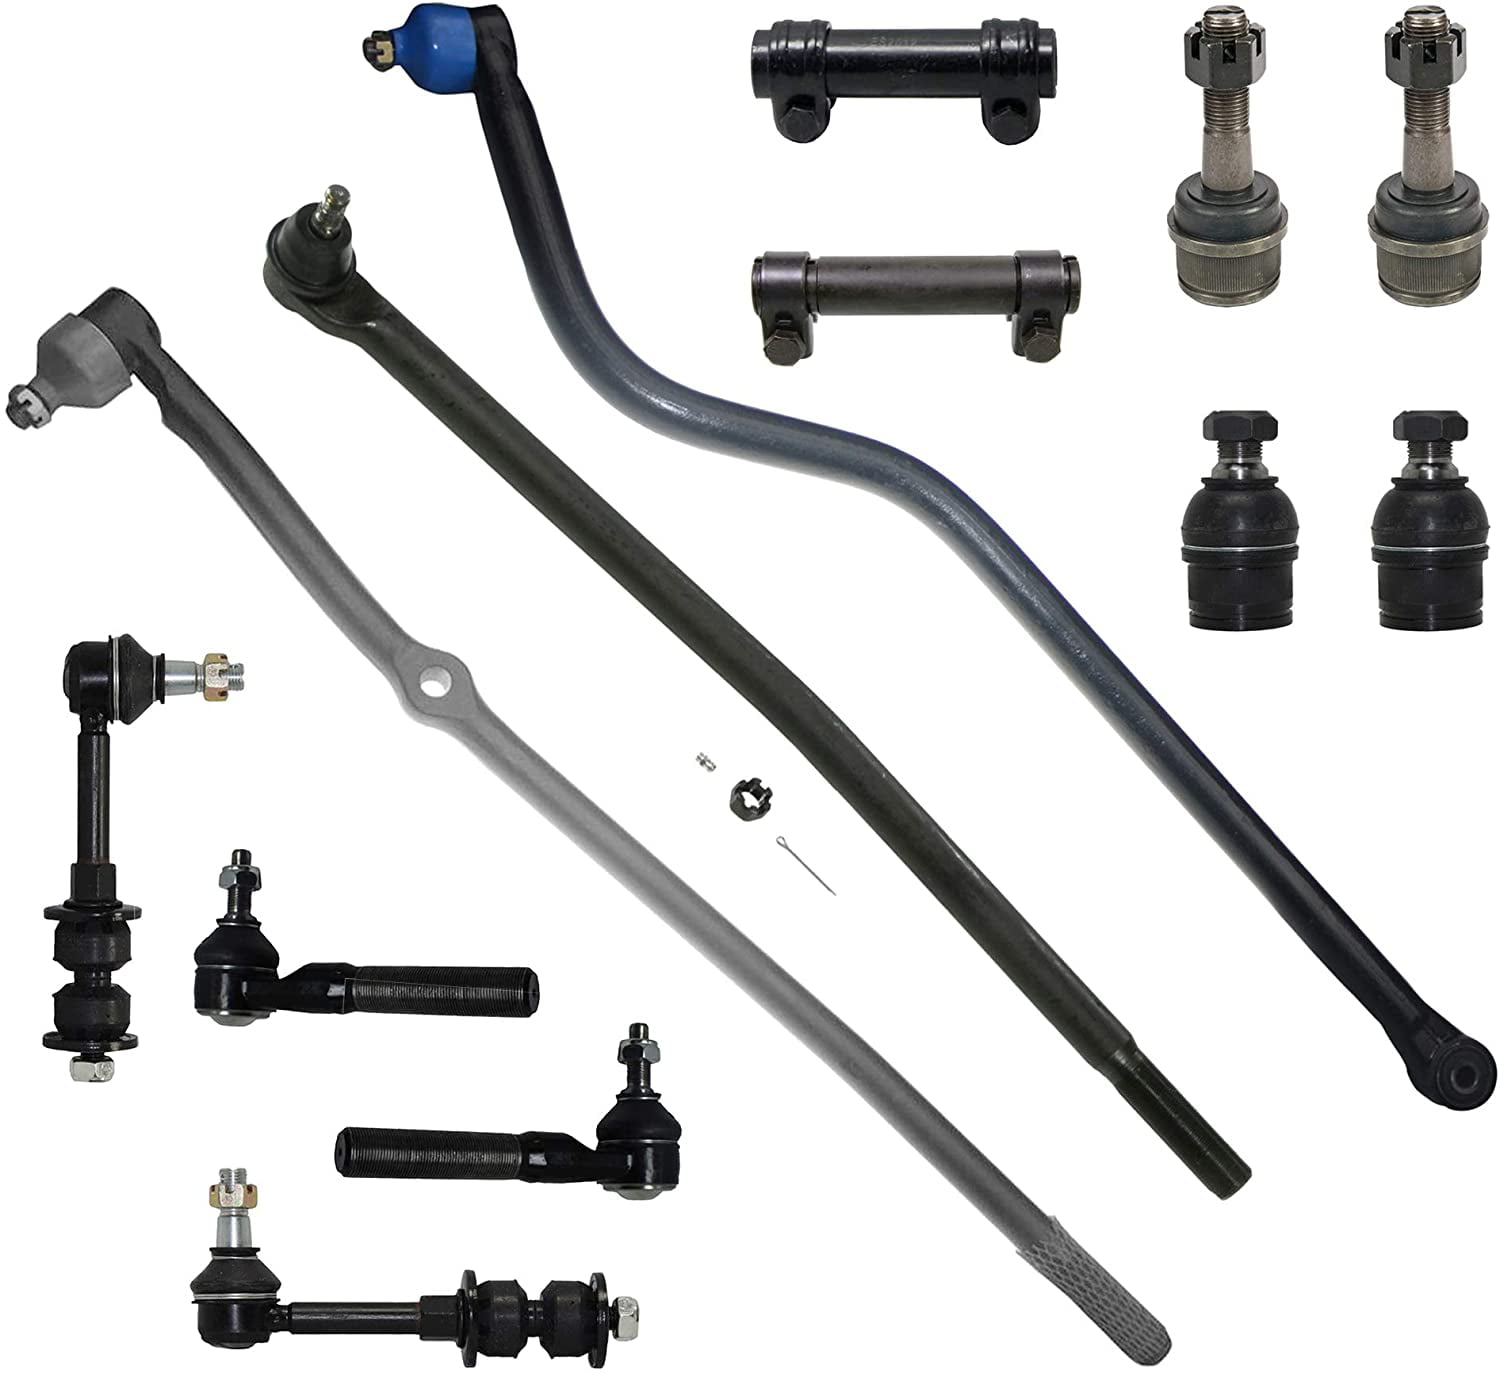 Left & Right for 1996-1997 Dodge Ram 2500 Dana 60 4WD - 96-97 Dodge Ram 3500 4x4 DANA 60 Sway Bars 13pc Front Inner Outer Tie Rod Links Upper & Lower Ball Joints Track Bar & Adjustment Sleeves 